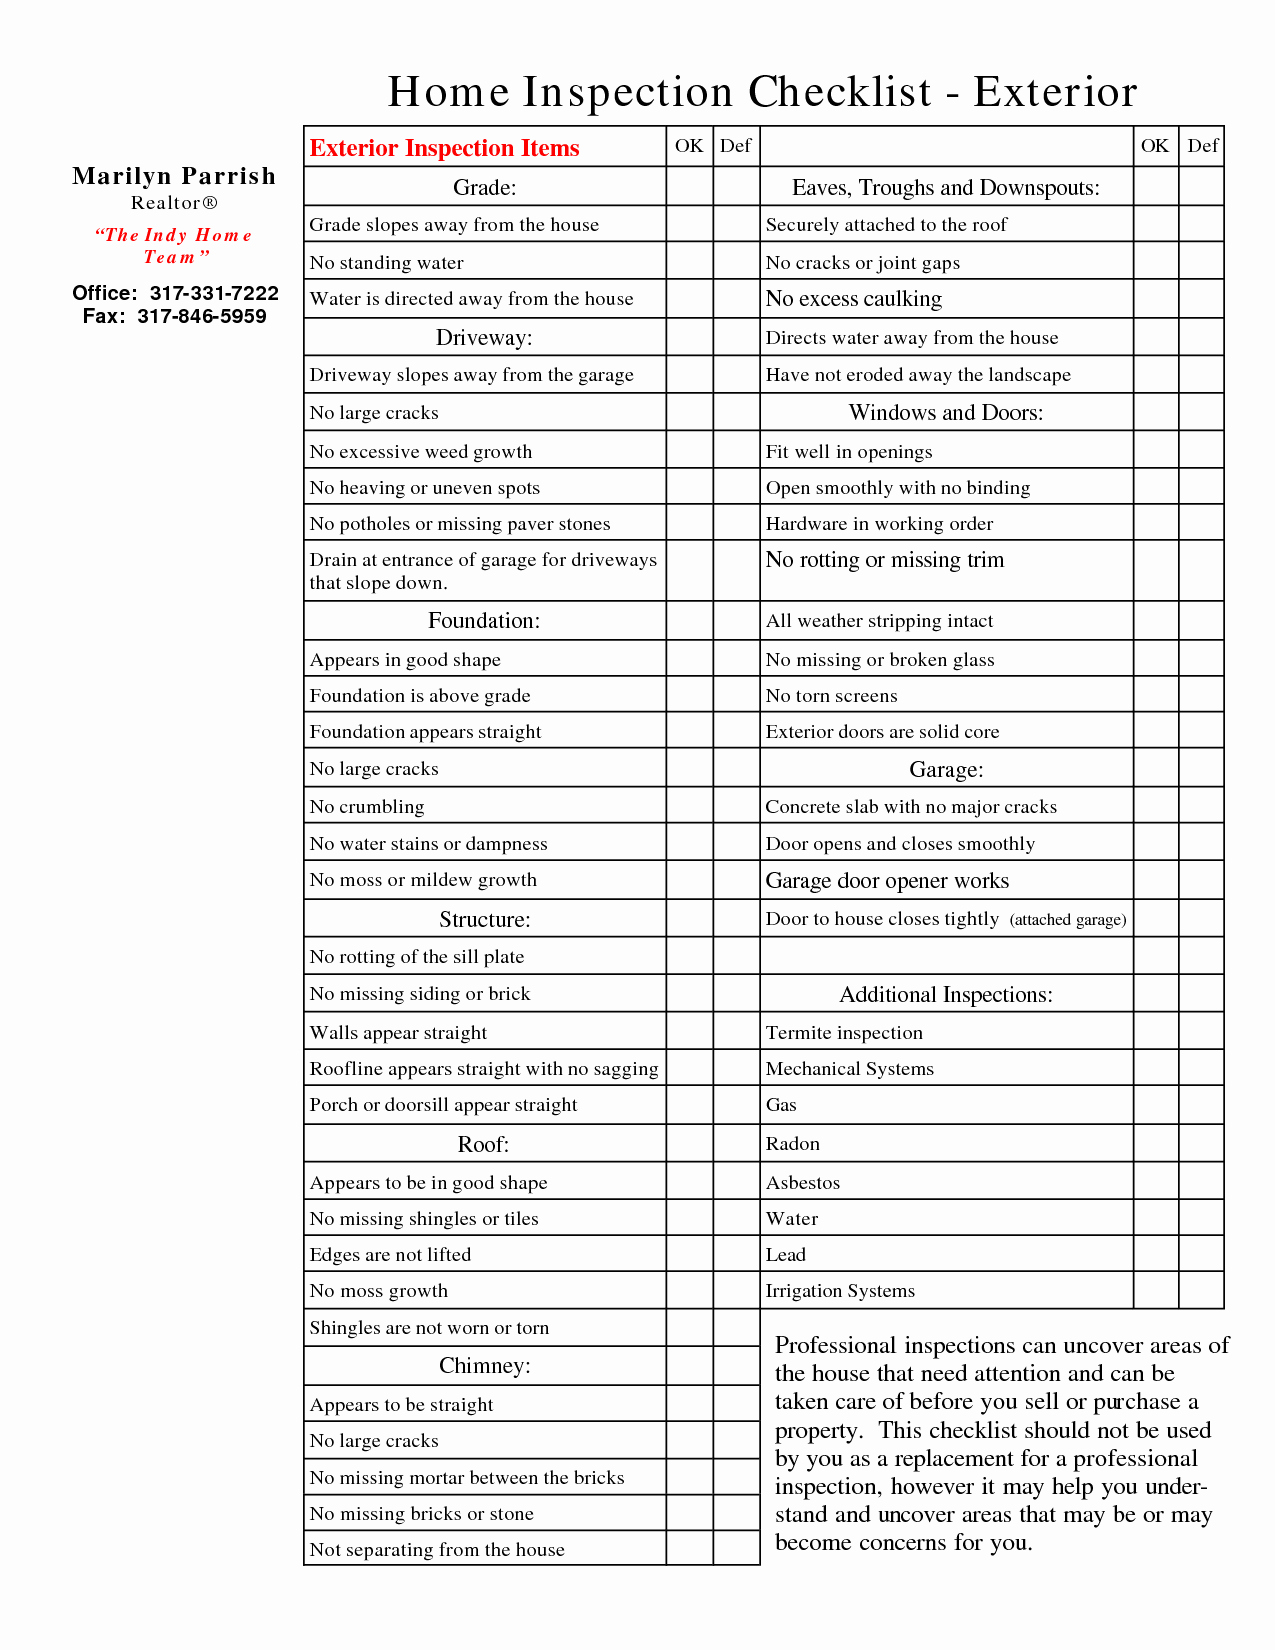 Home Inspection Checklist Template Inspirational Home Inspection List Template Document Sample